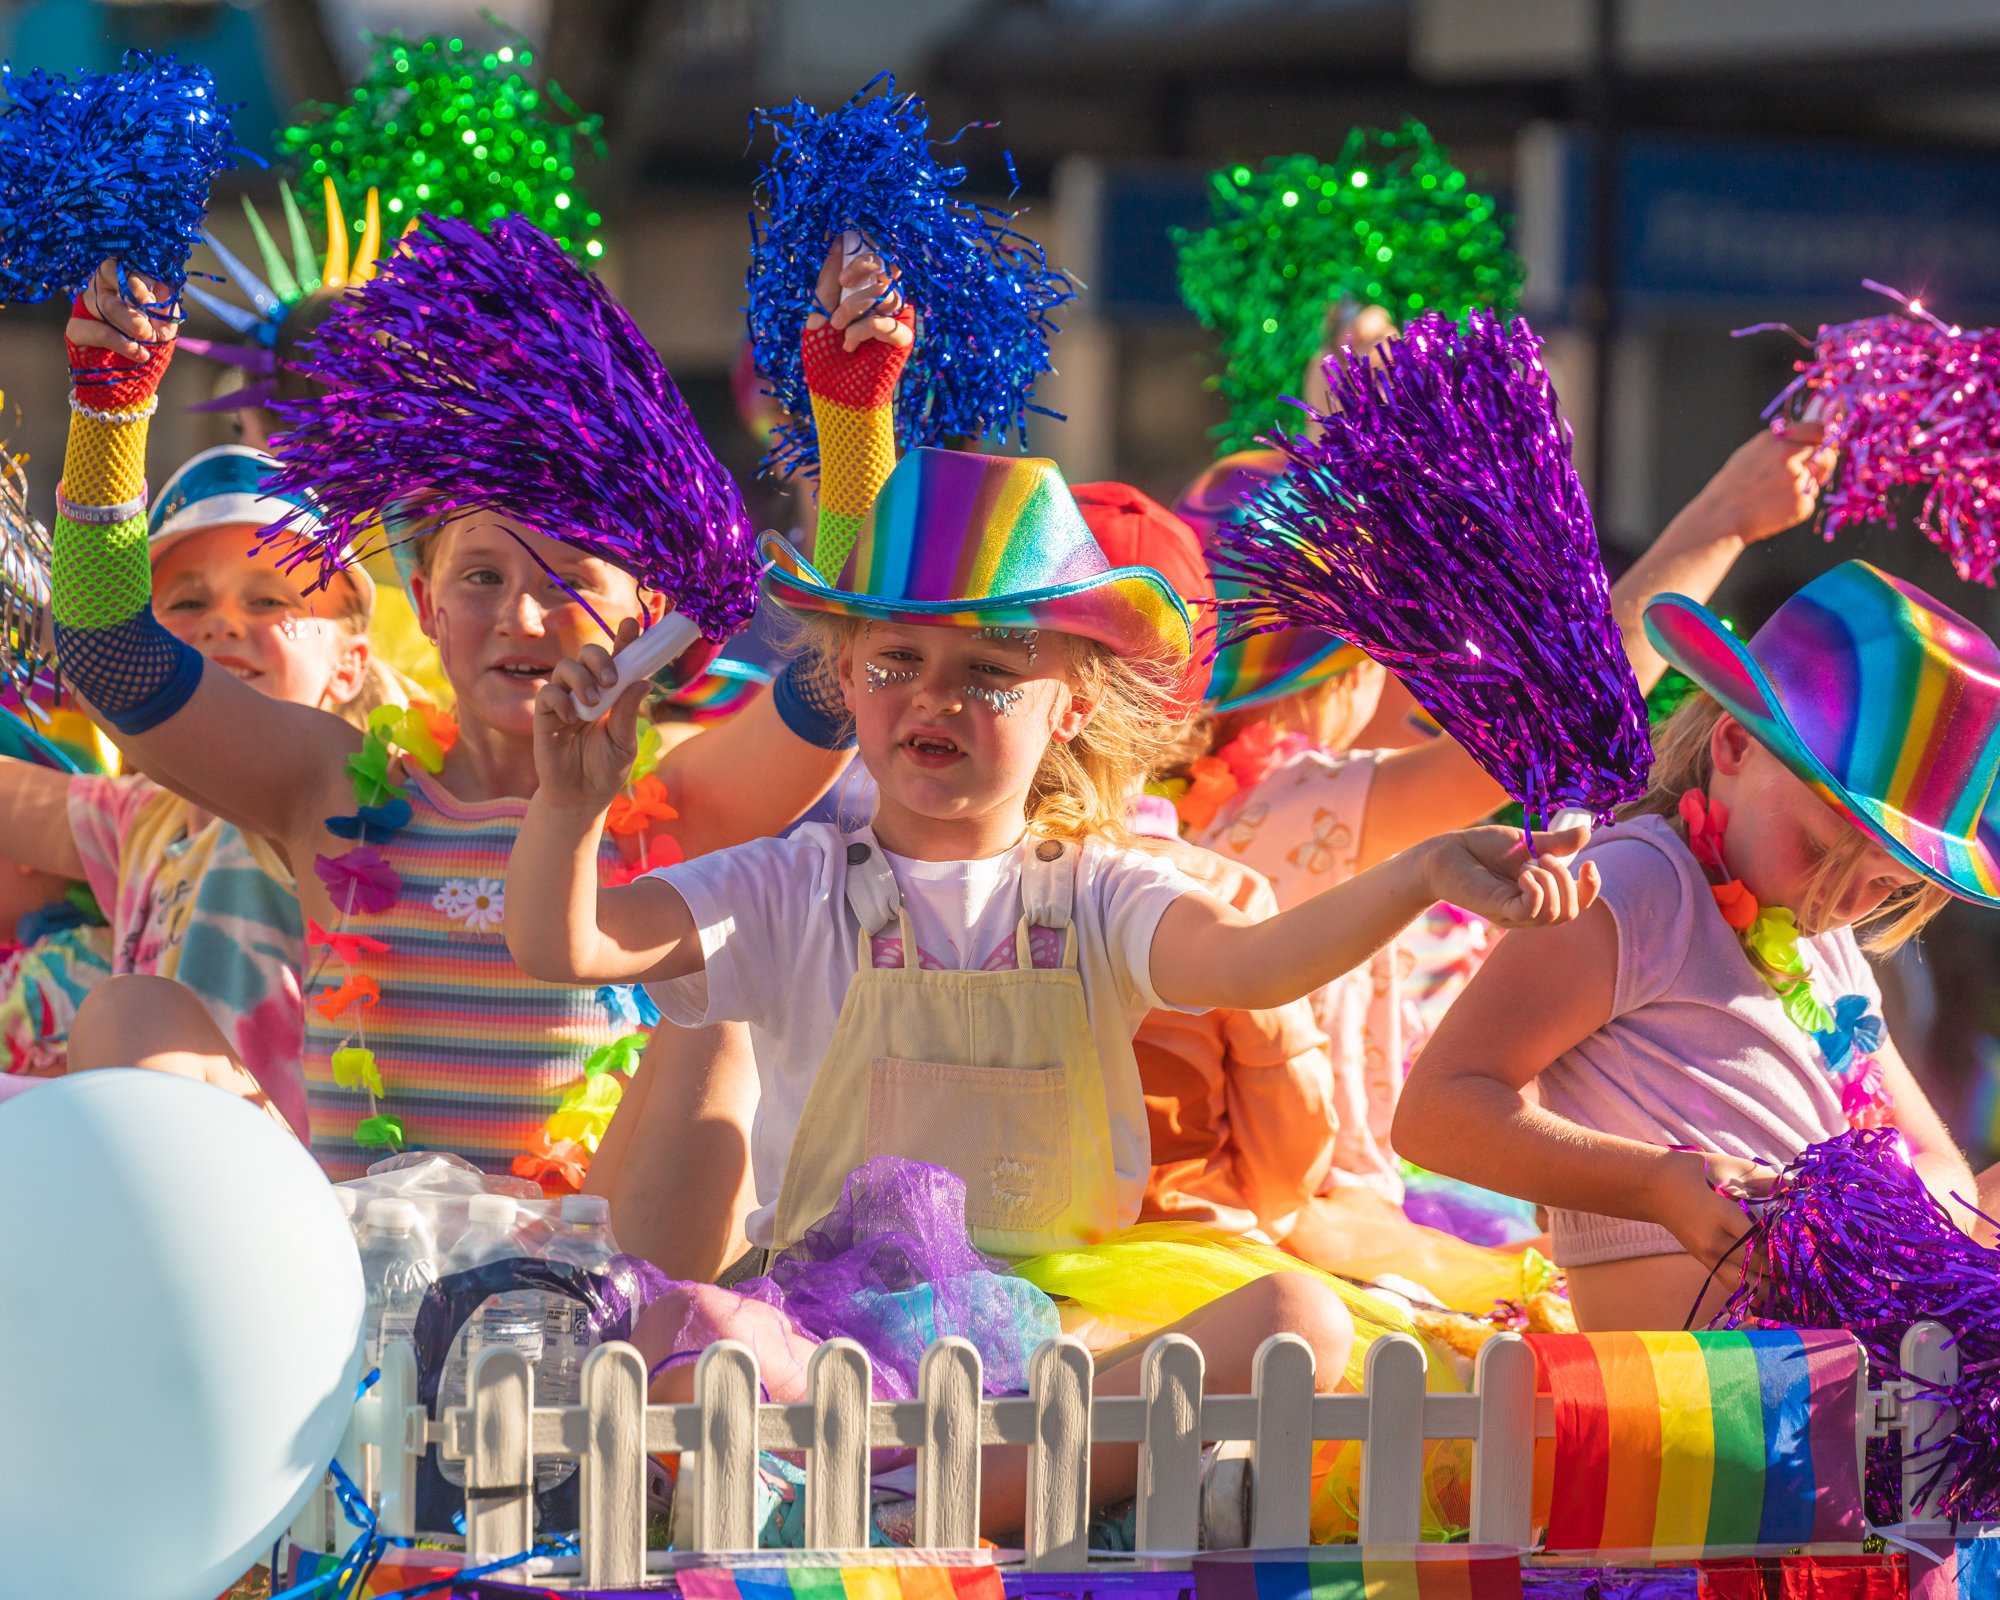 Celebrate good times, come on! 🌈🎶

We will never get tired of seeing the streets of Wagga filled with colour, love and laughter!

#waggamardigras #lgbt #gay #lgbtq #pride #lesbian #loveislove #queer #instagay #bisexual #transgender #trans #gaypride